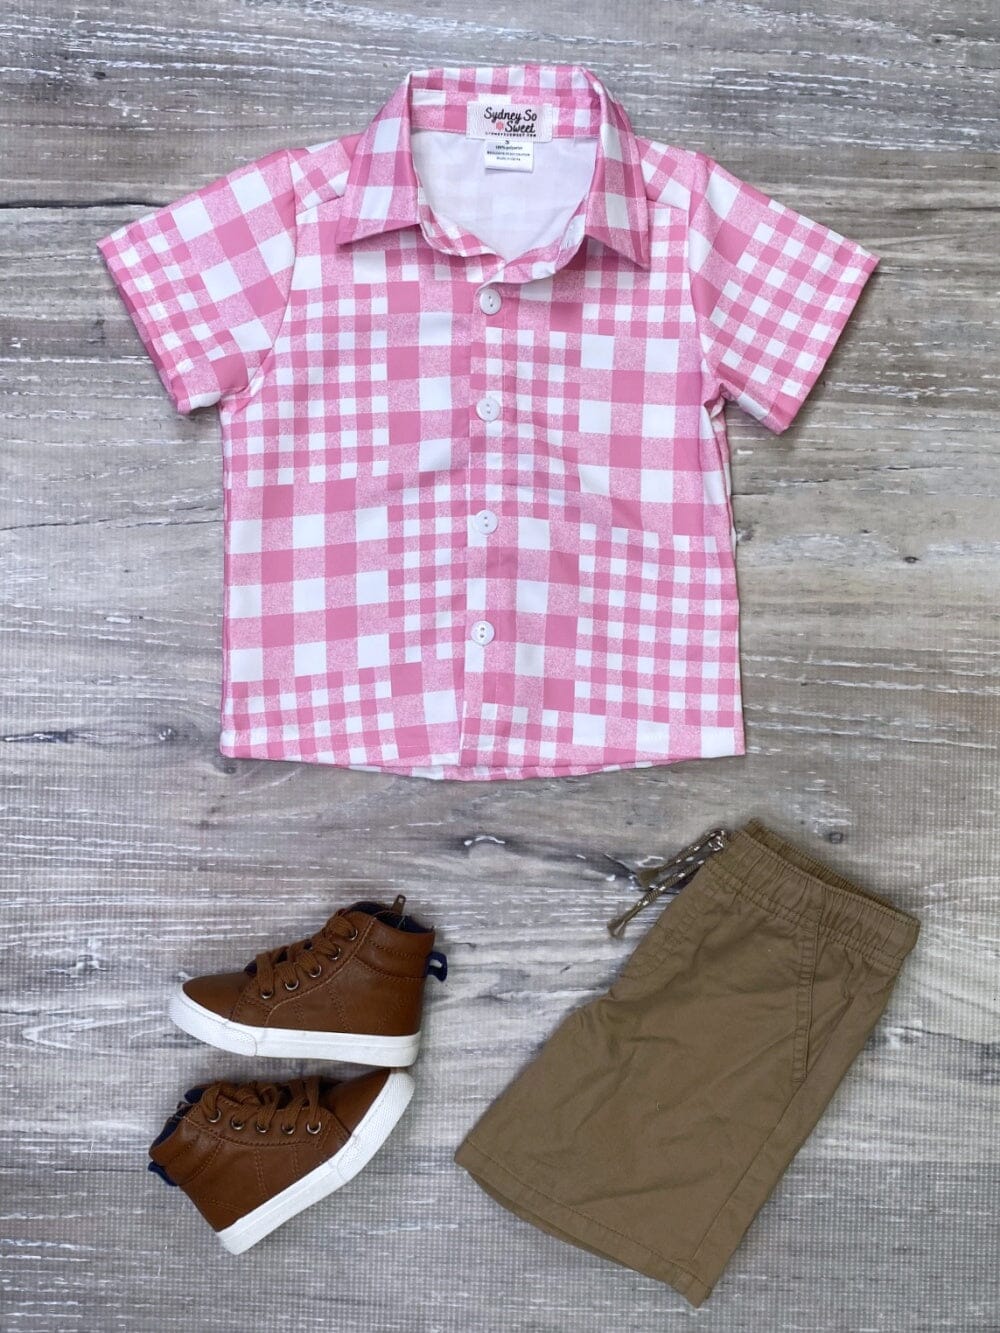 Pink & White Patchwork Plaid Boys Button Up Top